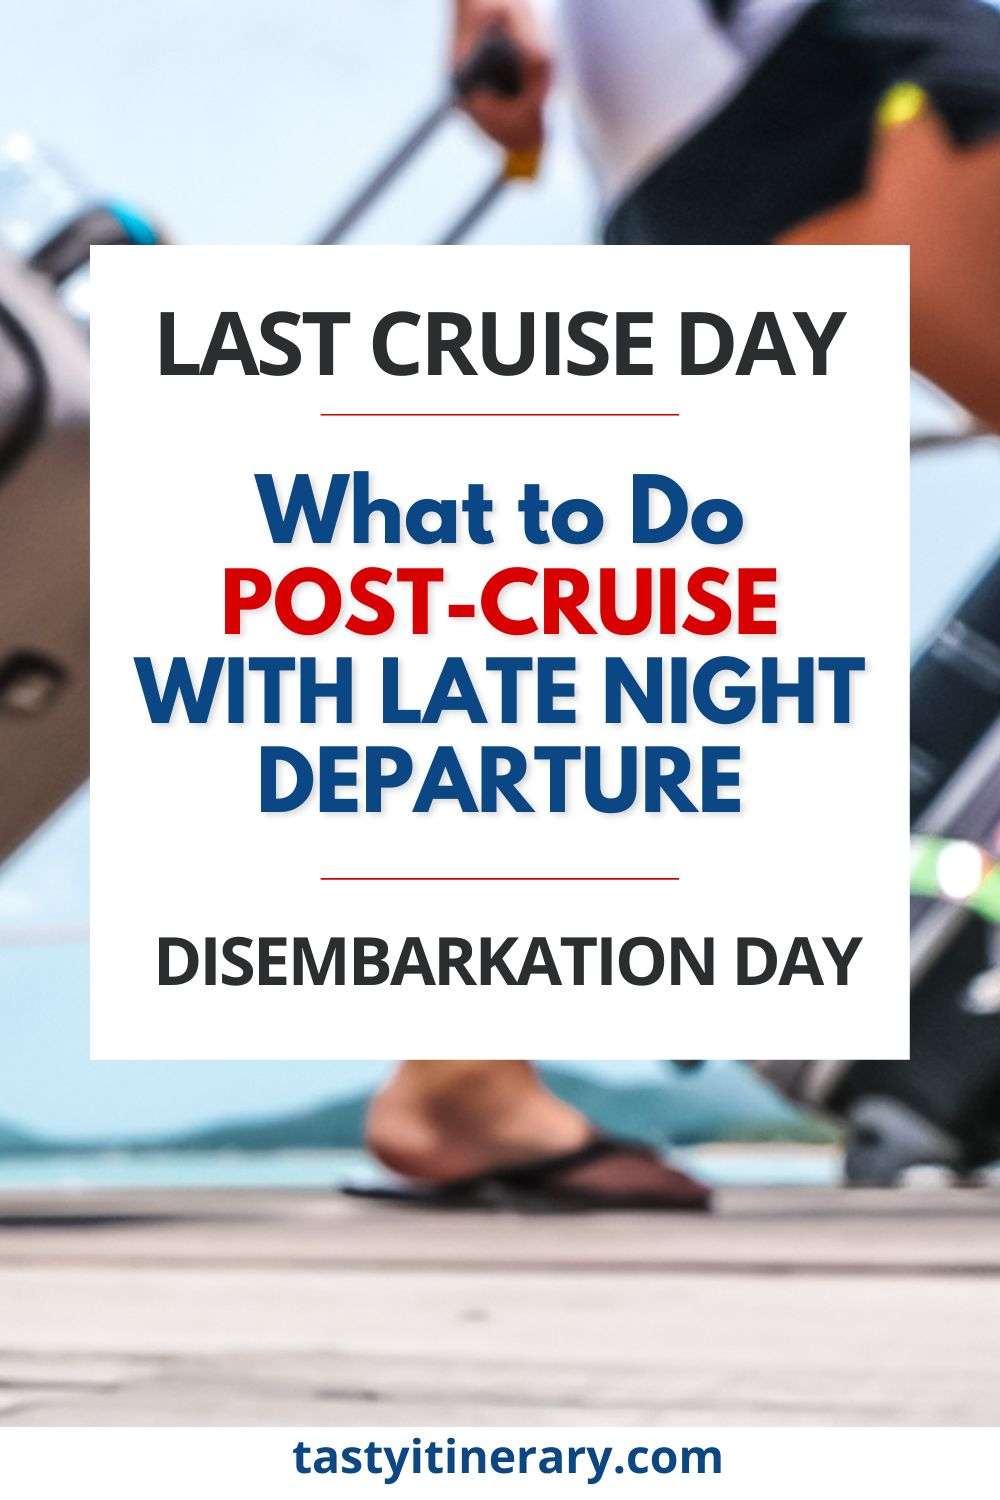 13 Smart Tips for a Smooth Cruise Disembarkation Day